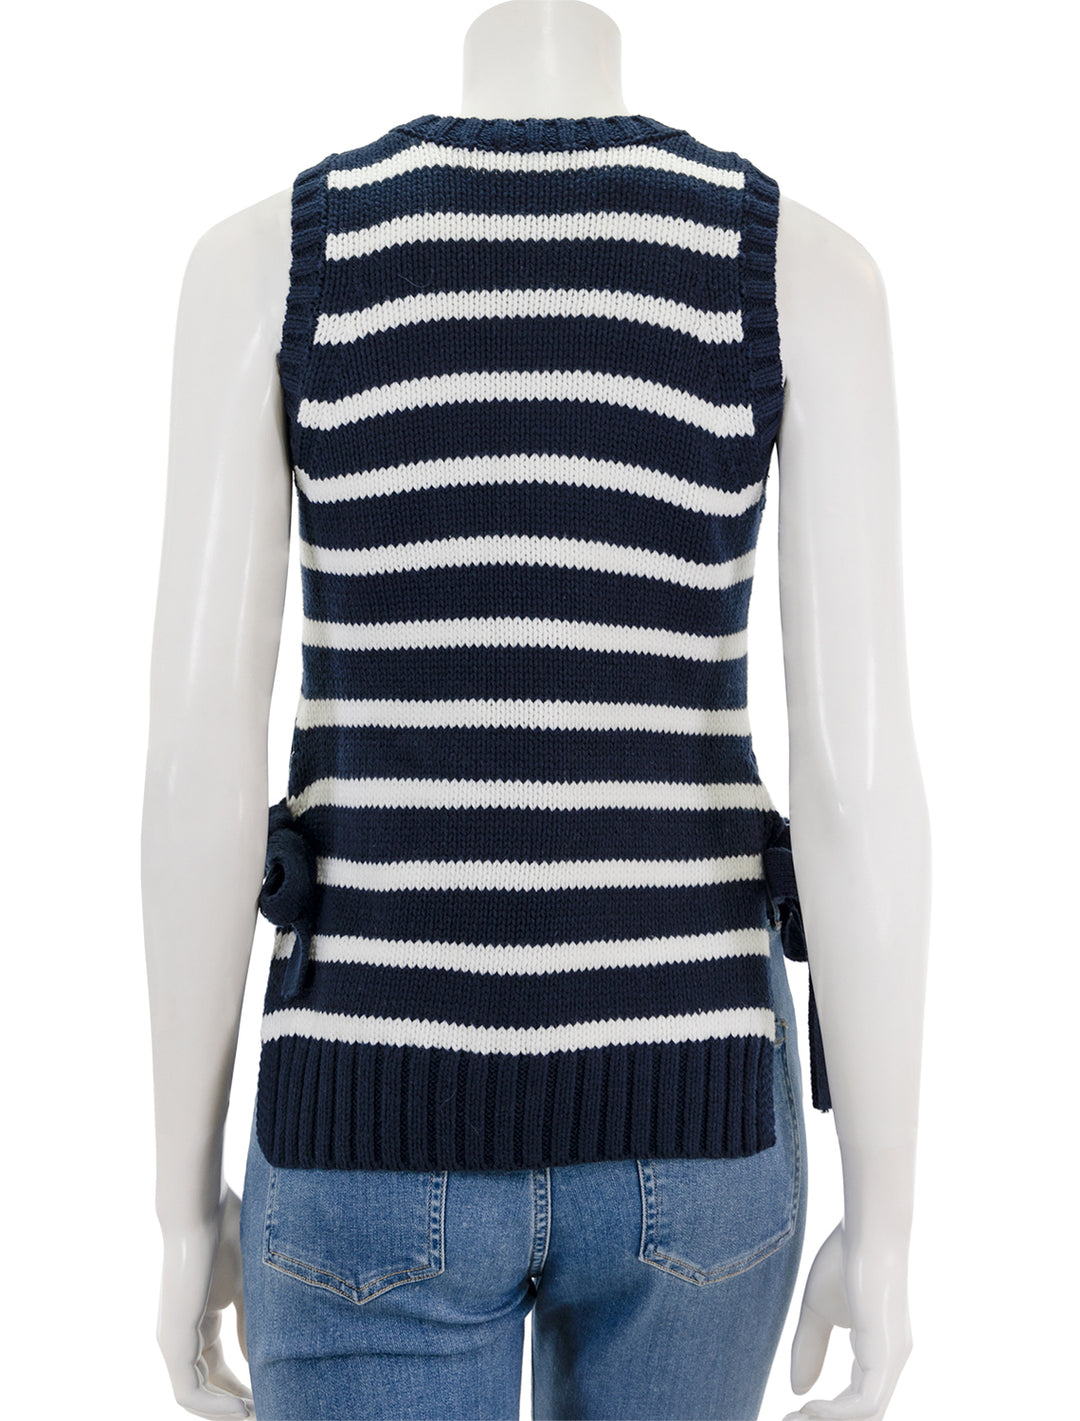 Back view of Splendid's zoey tie sweater tank in navy and white.